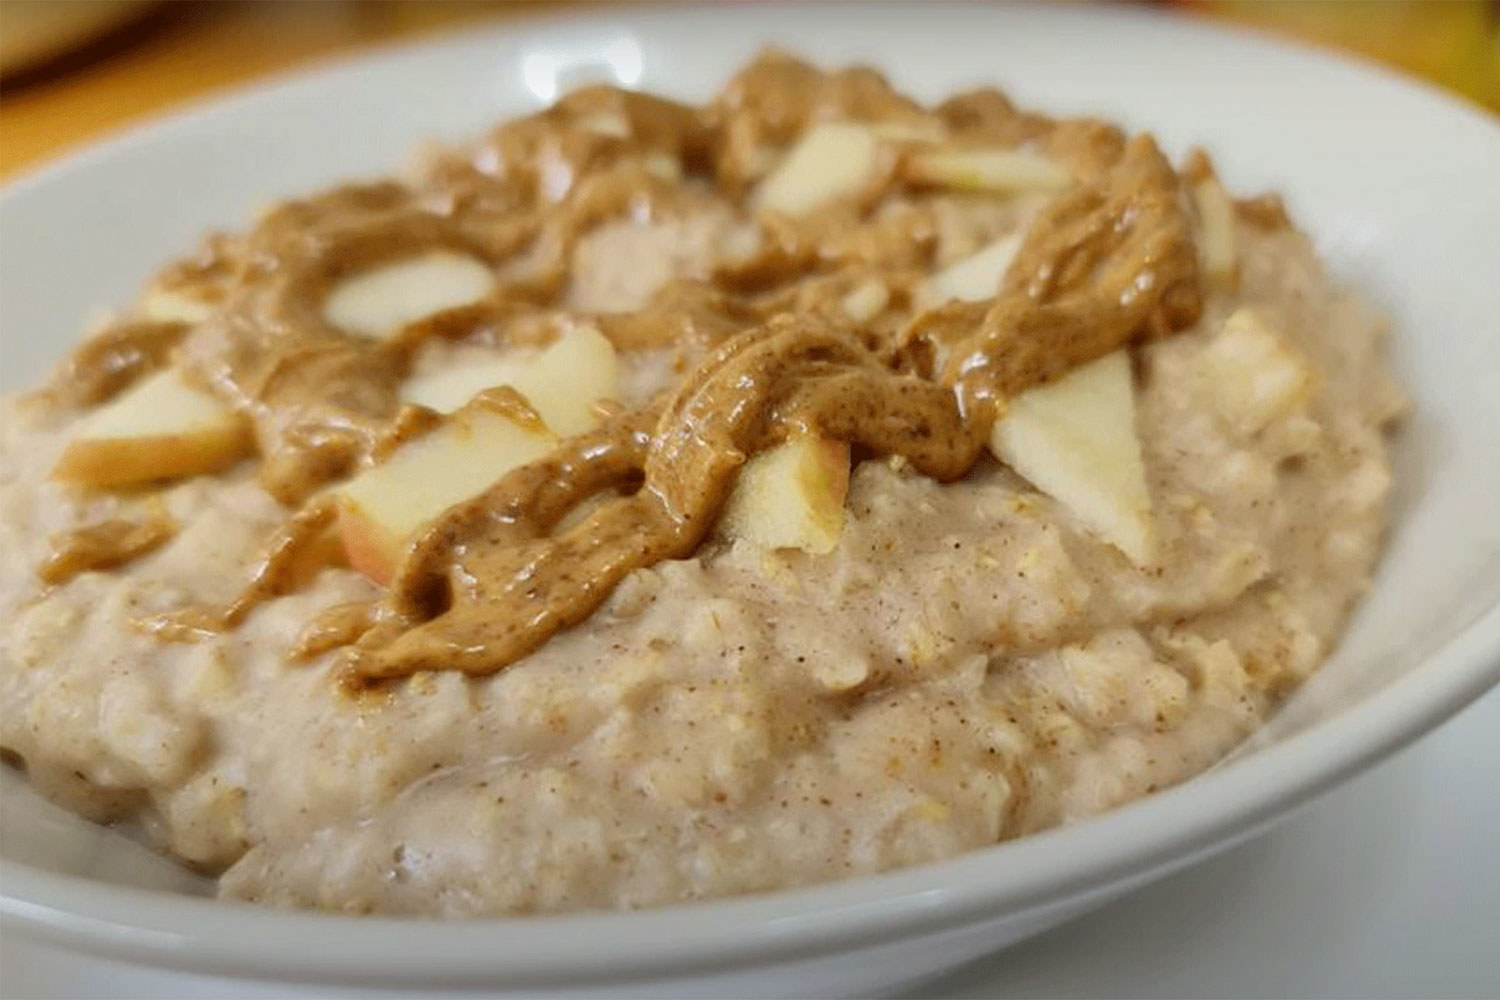 Oatmeal with peanut butter and apples